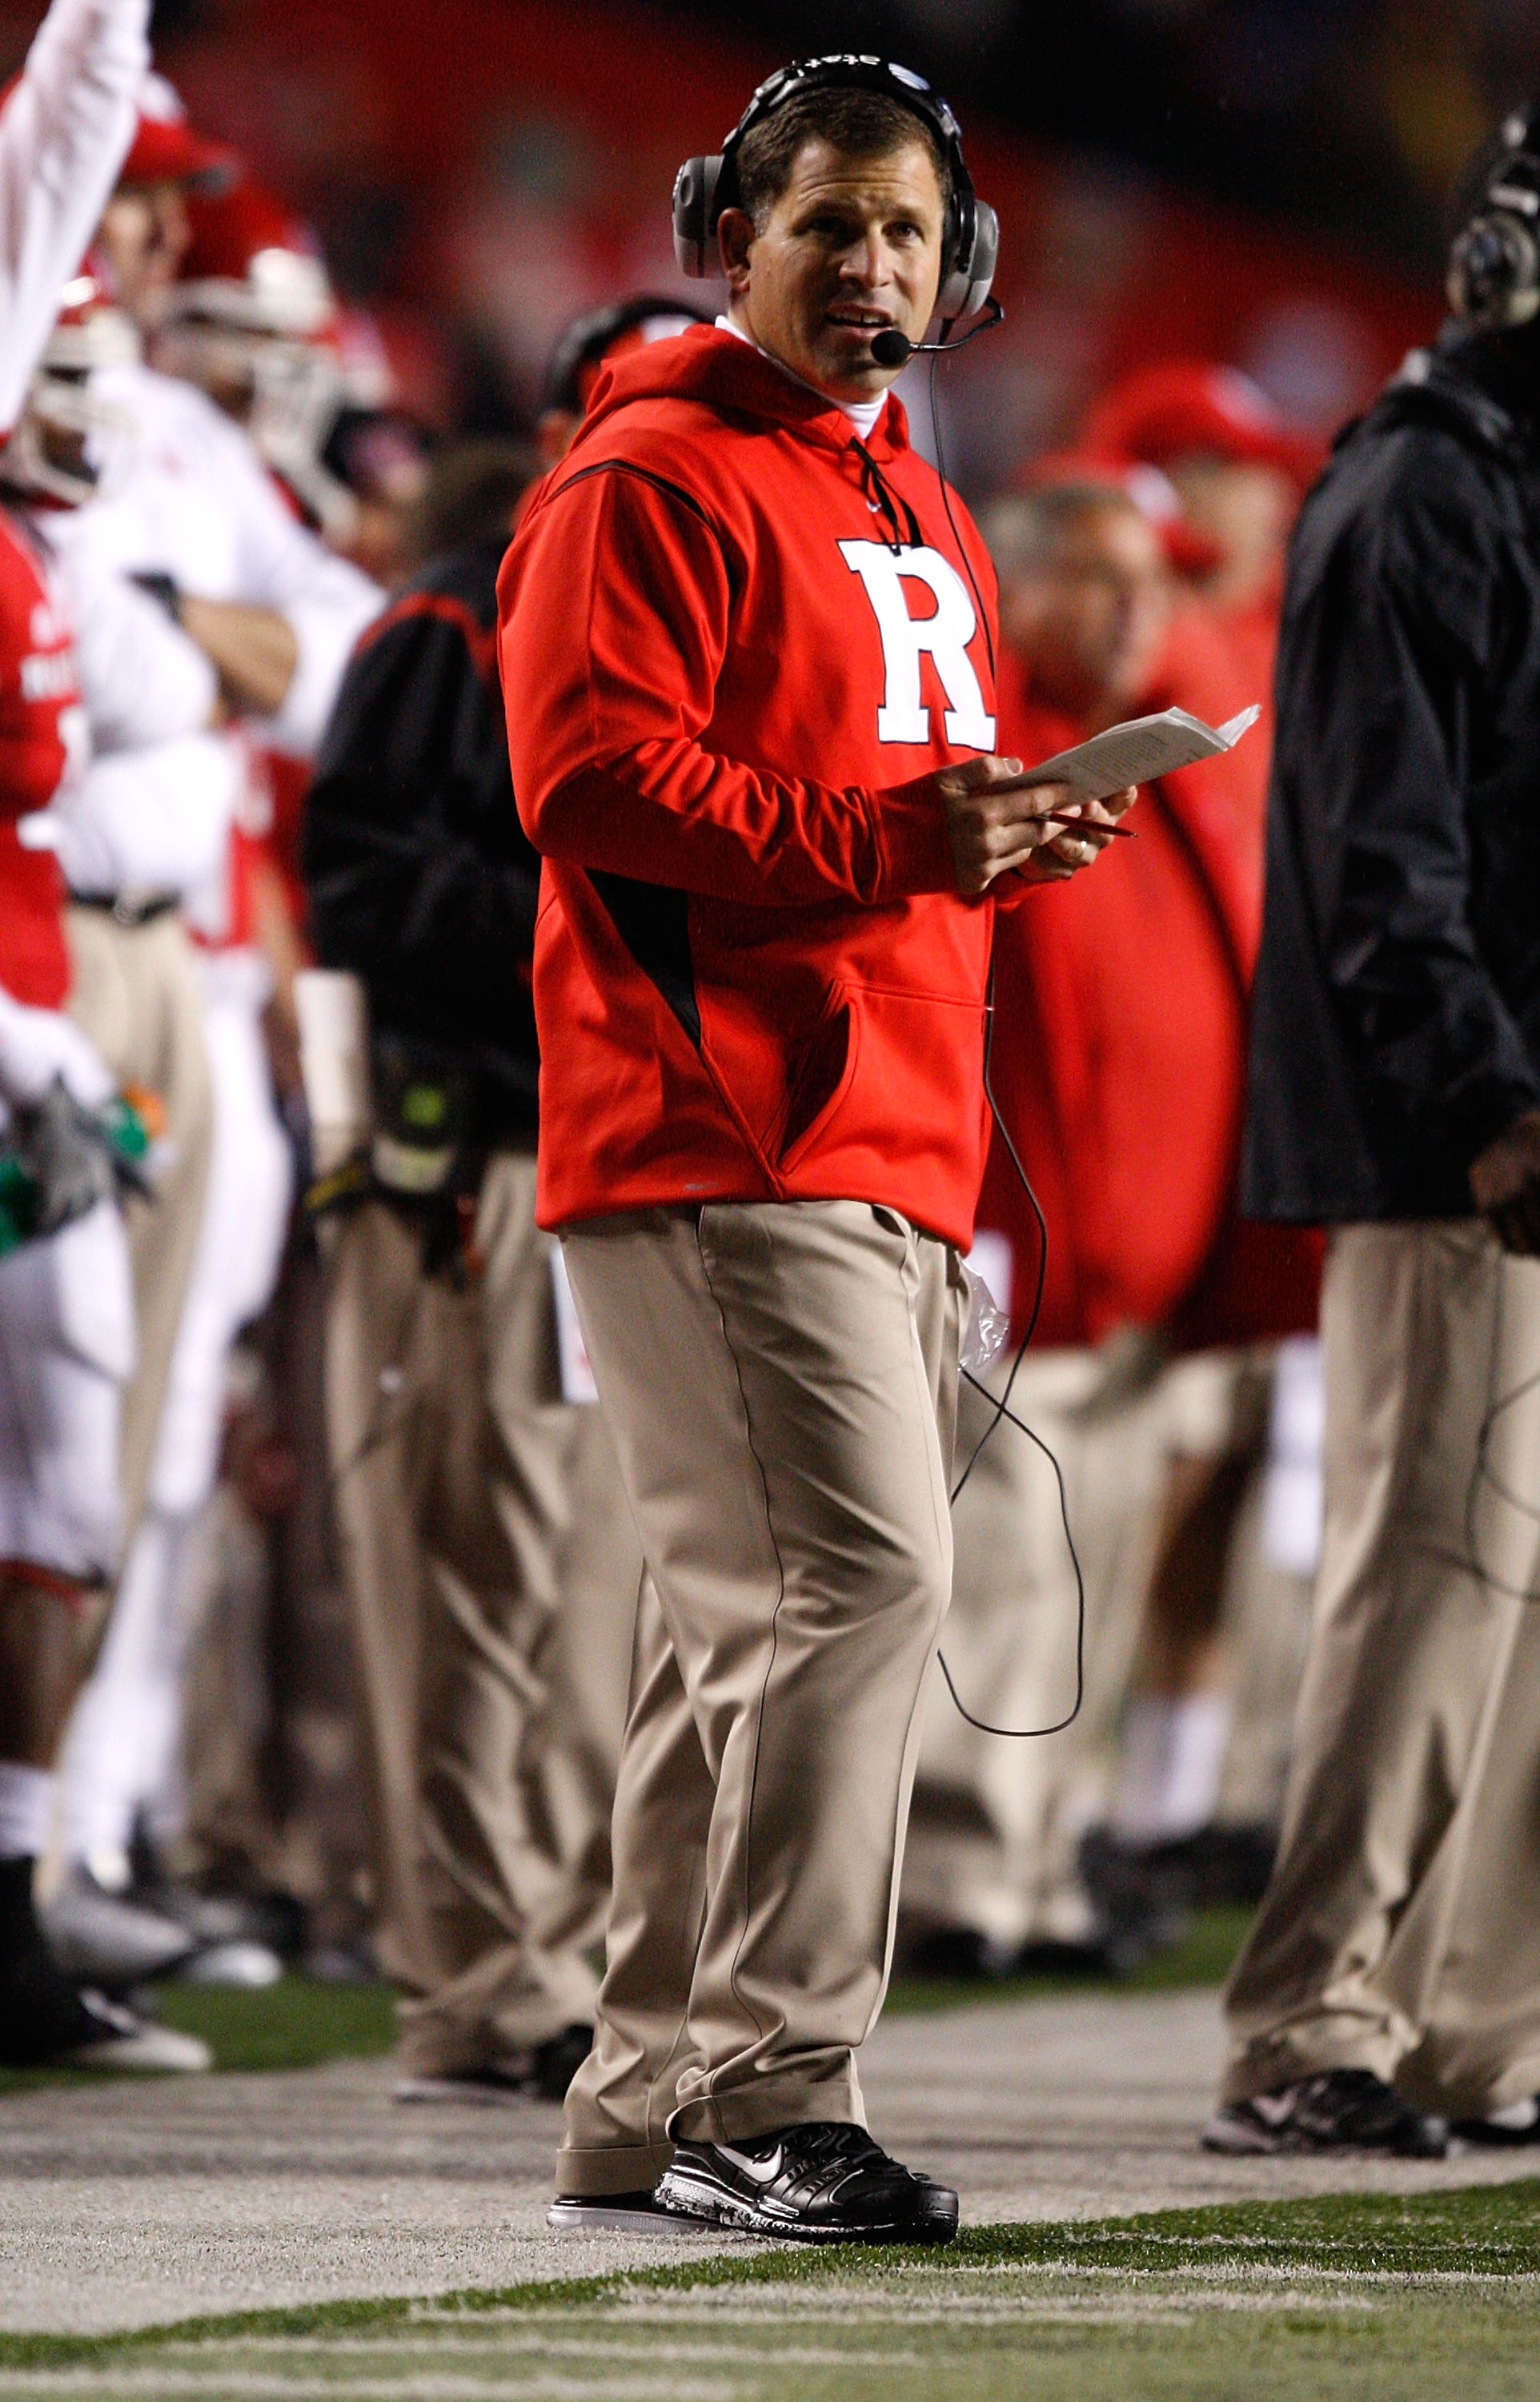 PISCATAWAY, NJ - OCTOBER 16: Head Coach Greg Schiano of the Rutgers University Scarlett Knights watches his team play against the University of Pittsburgh Panthers on October 16, 2009 at Rutgers Stadium in Piscataway, New Jersey. (Photo by Jared Wickerham